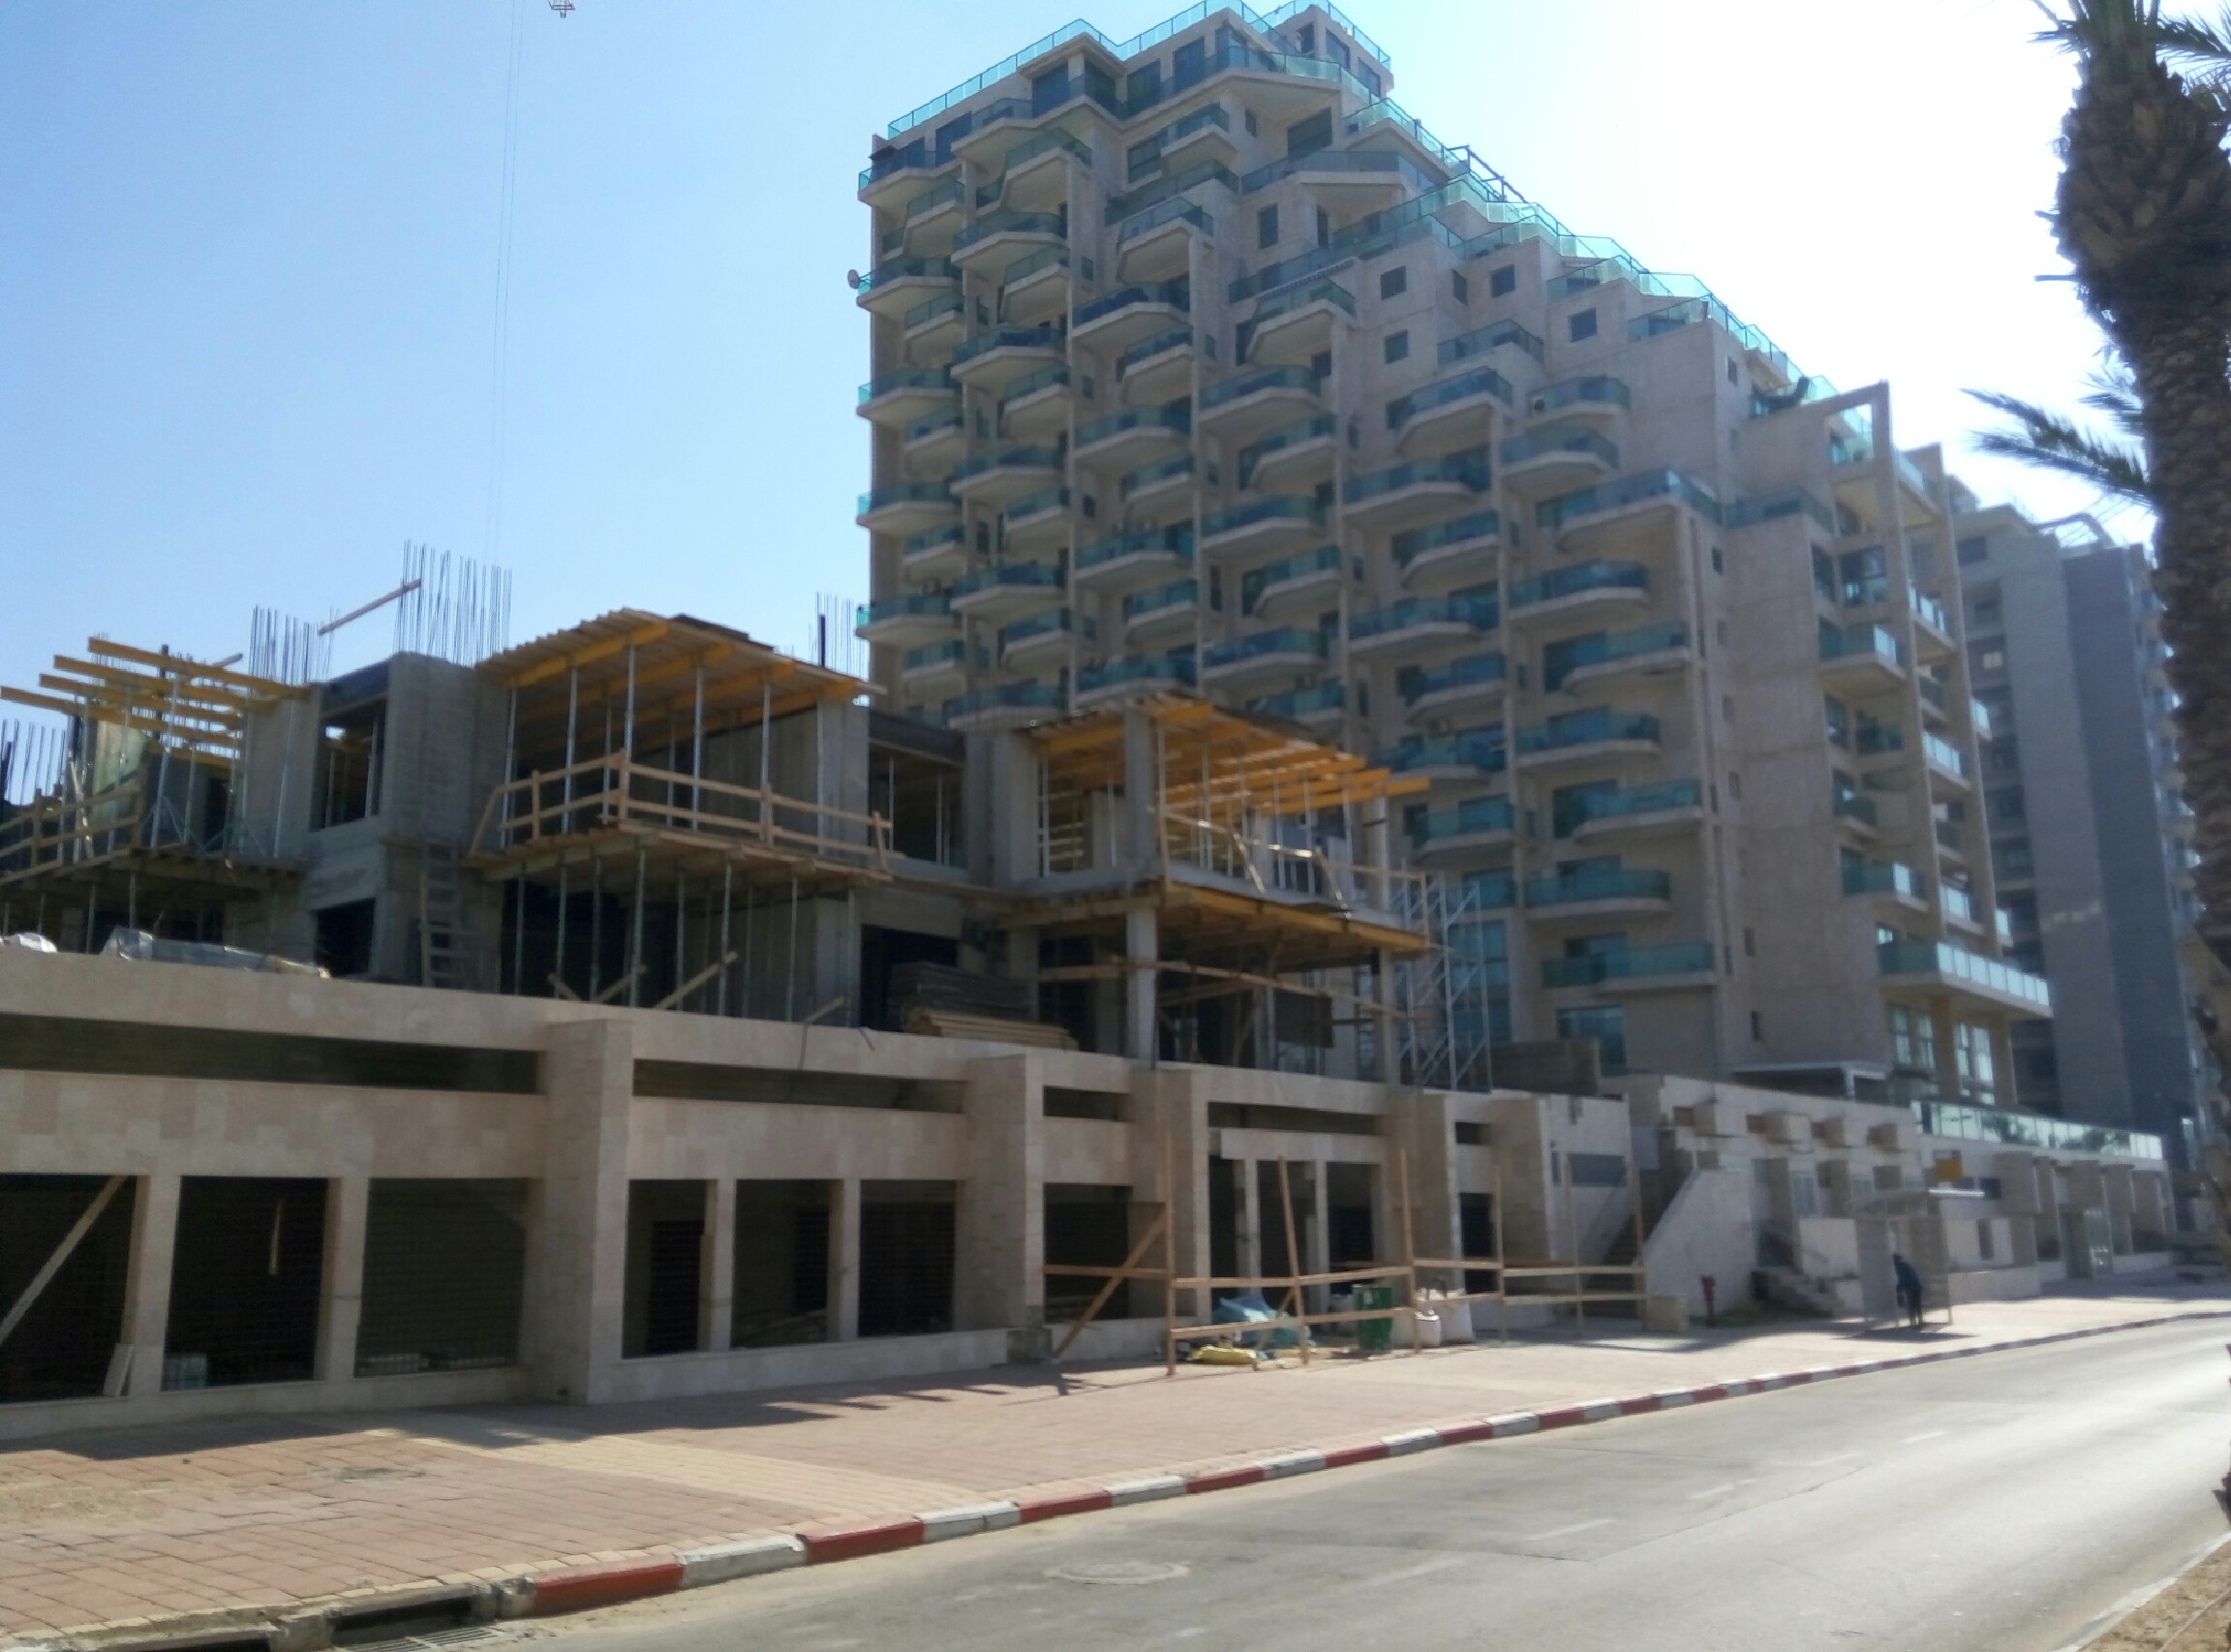 New construction in Israel